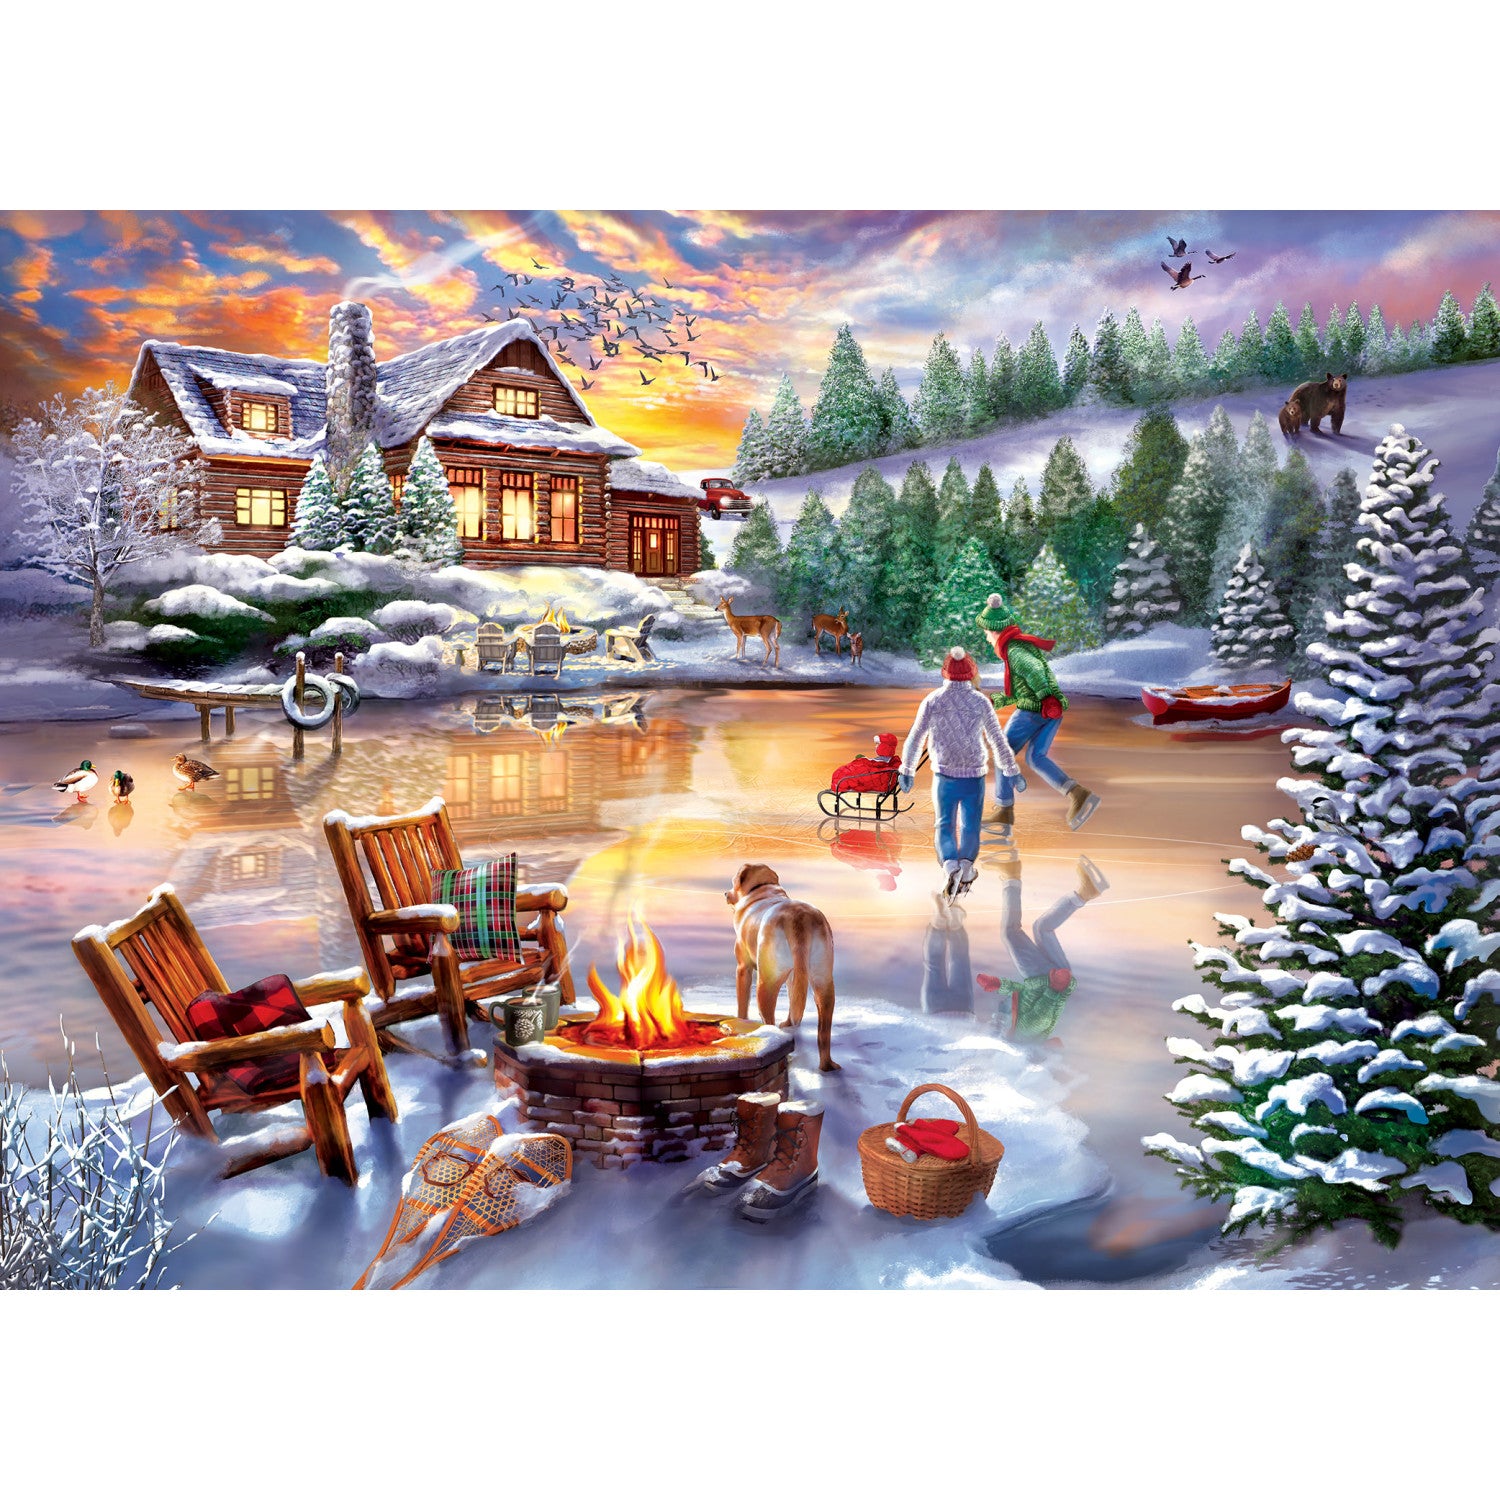 Time Away - An Evening Skate 1000 Piece Puzzle